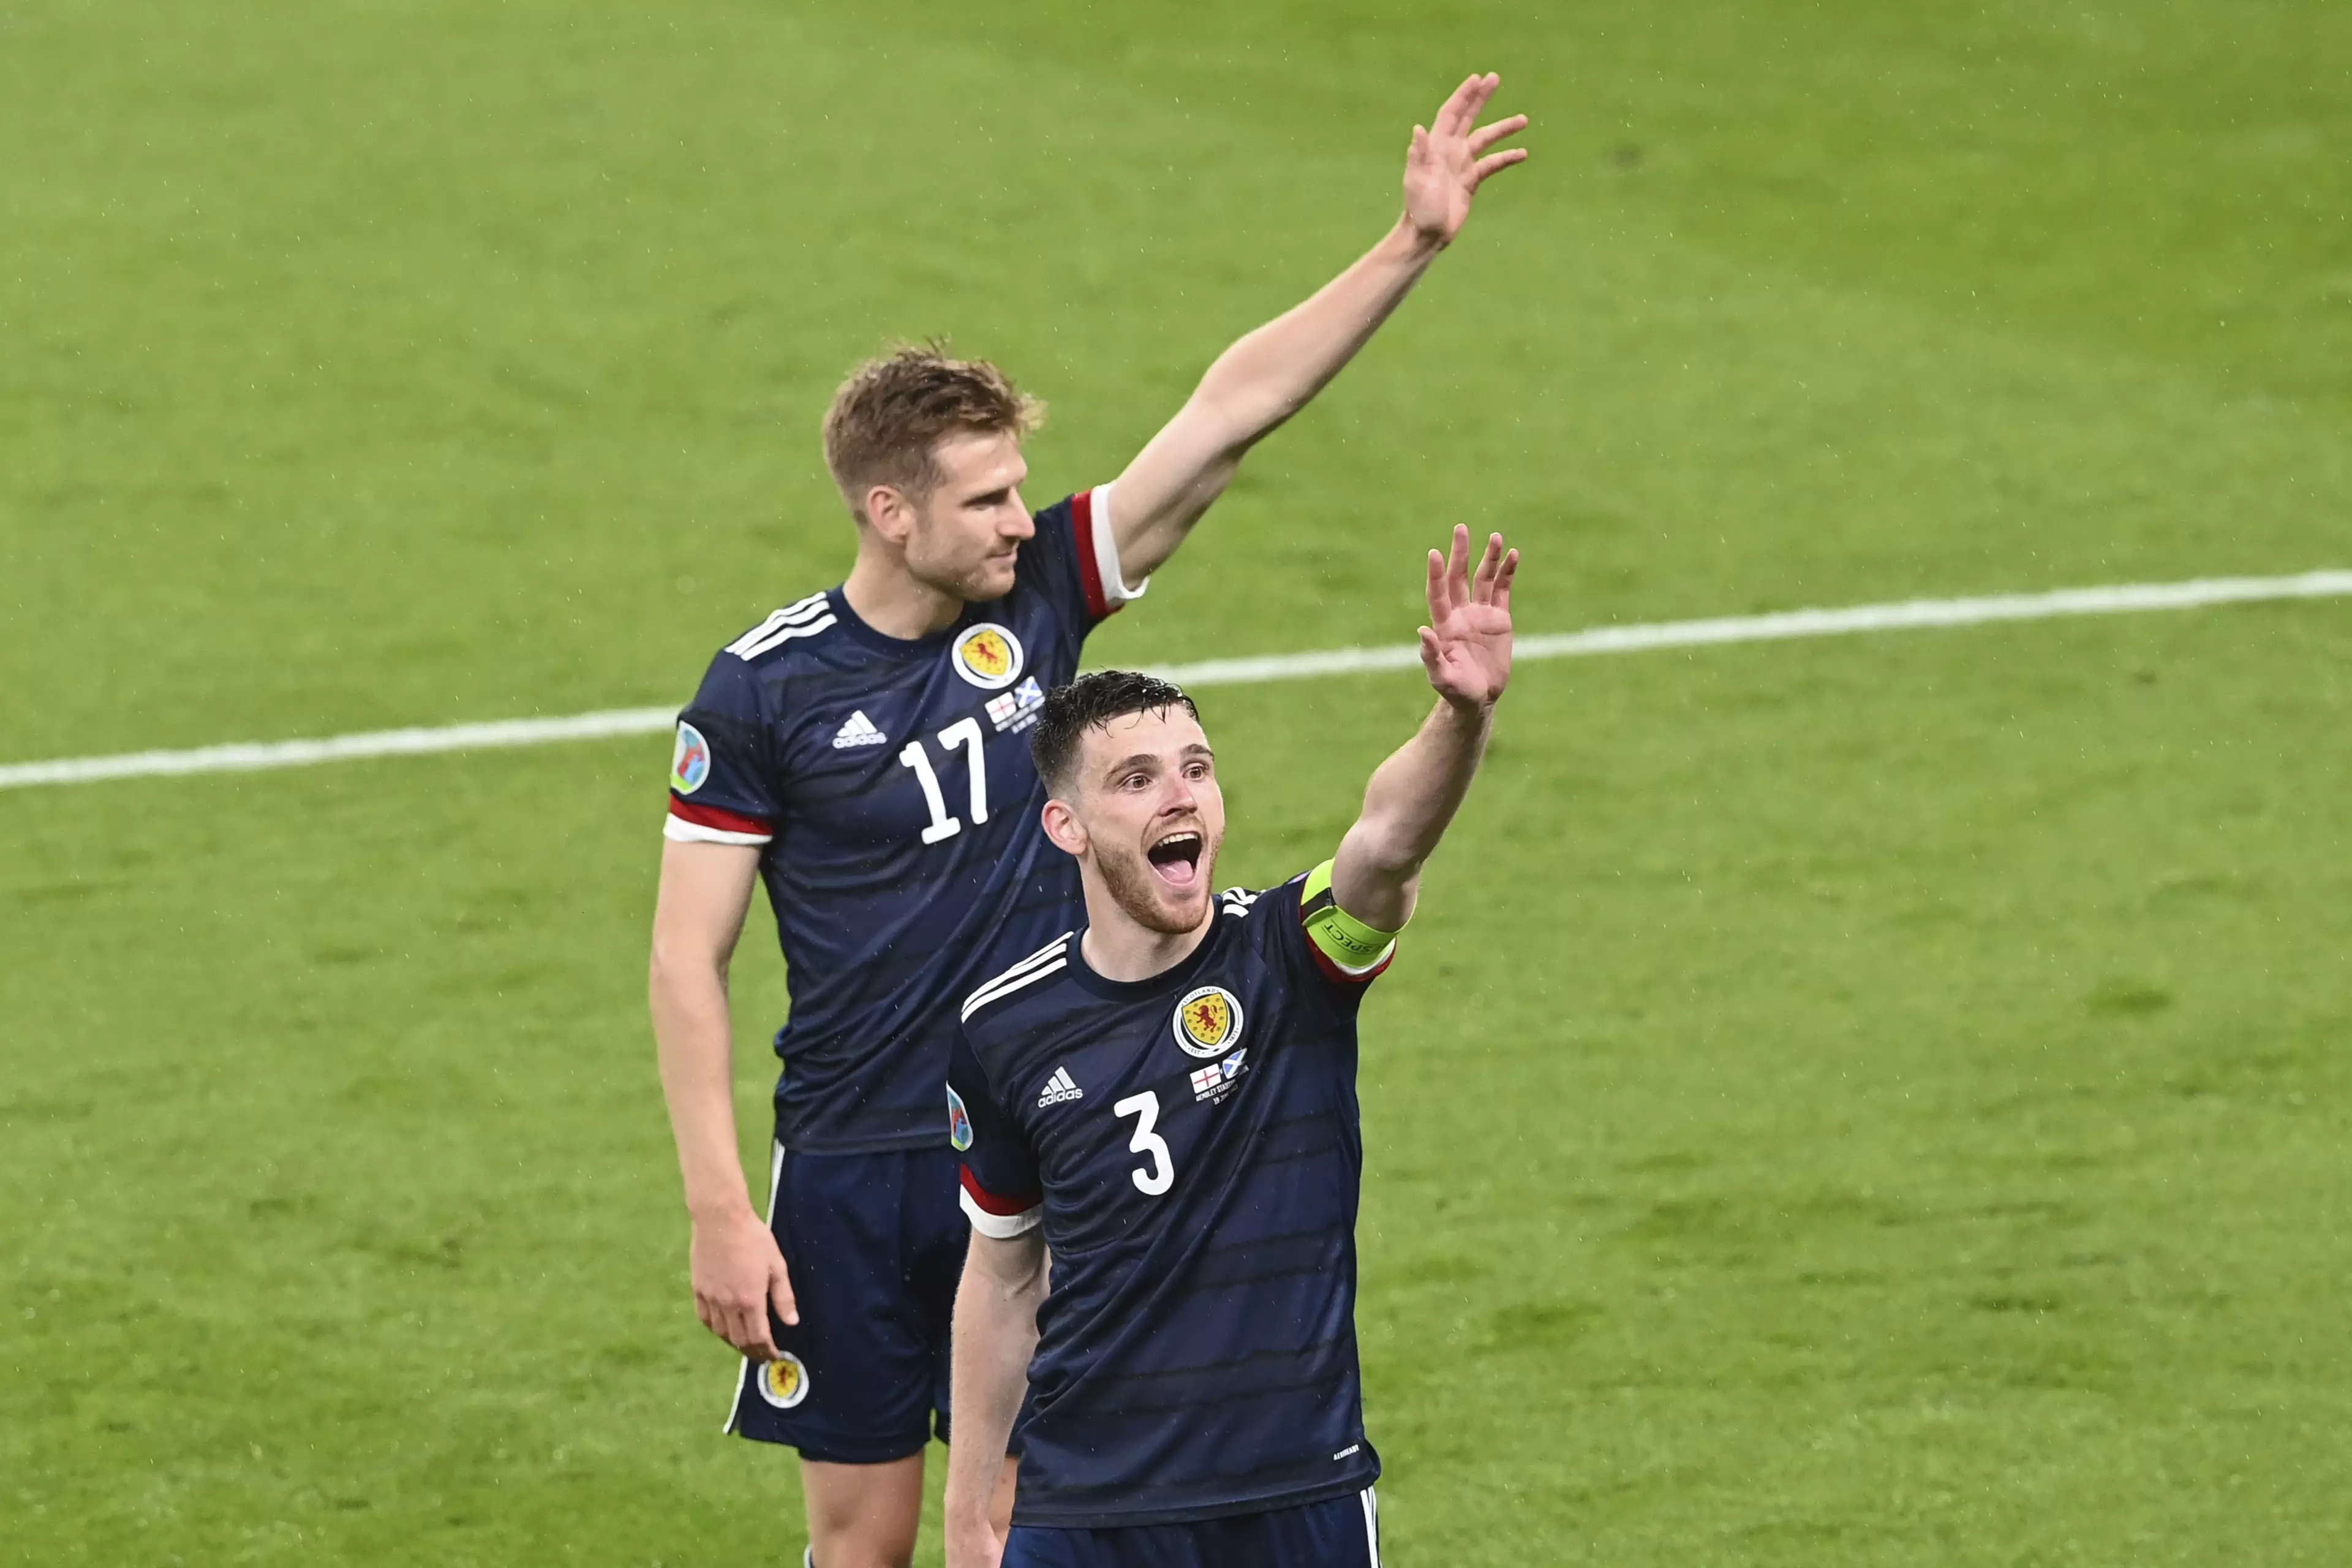 Scotland's chances of winning the tournament are still unsurprisingly slim despite the draw with England. Image: PA Images